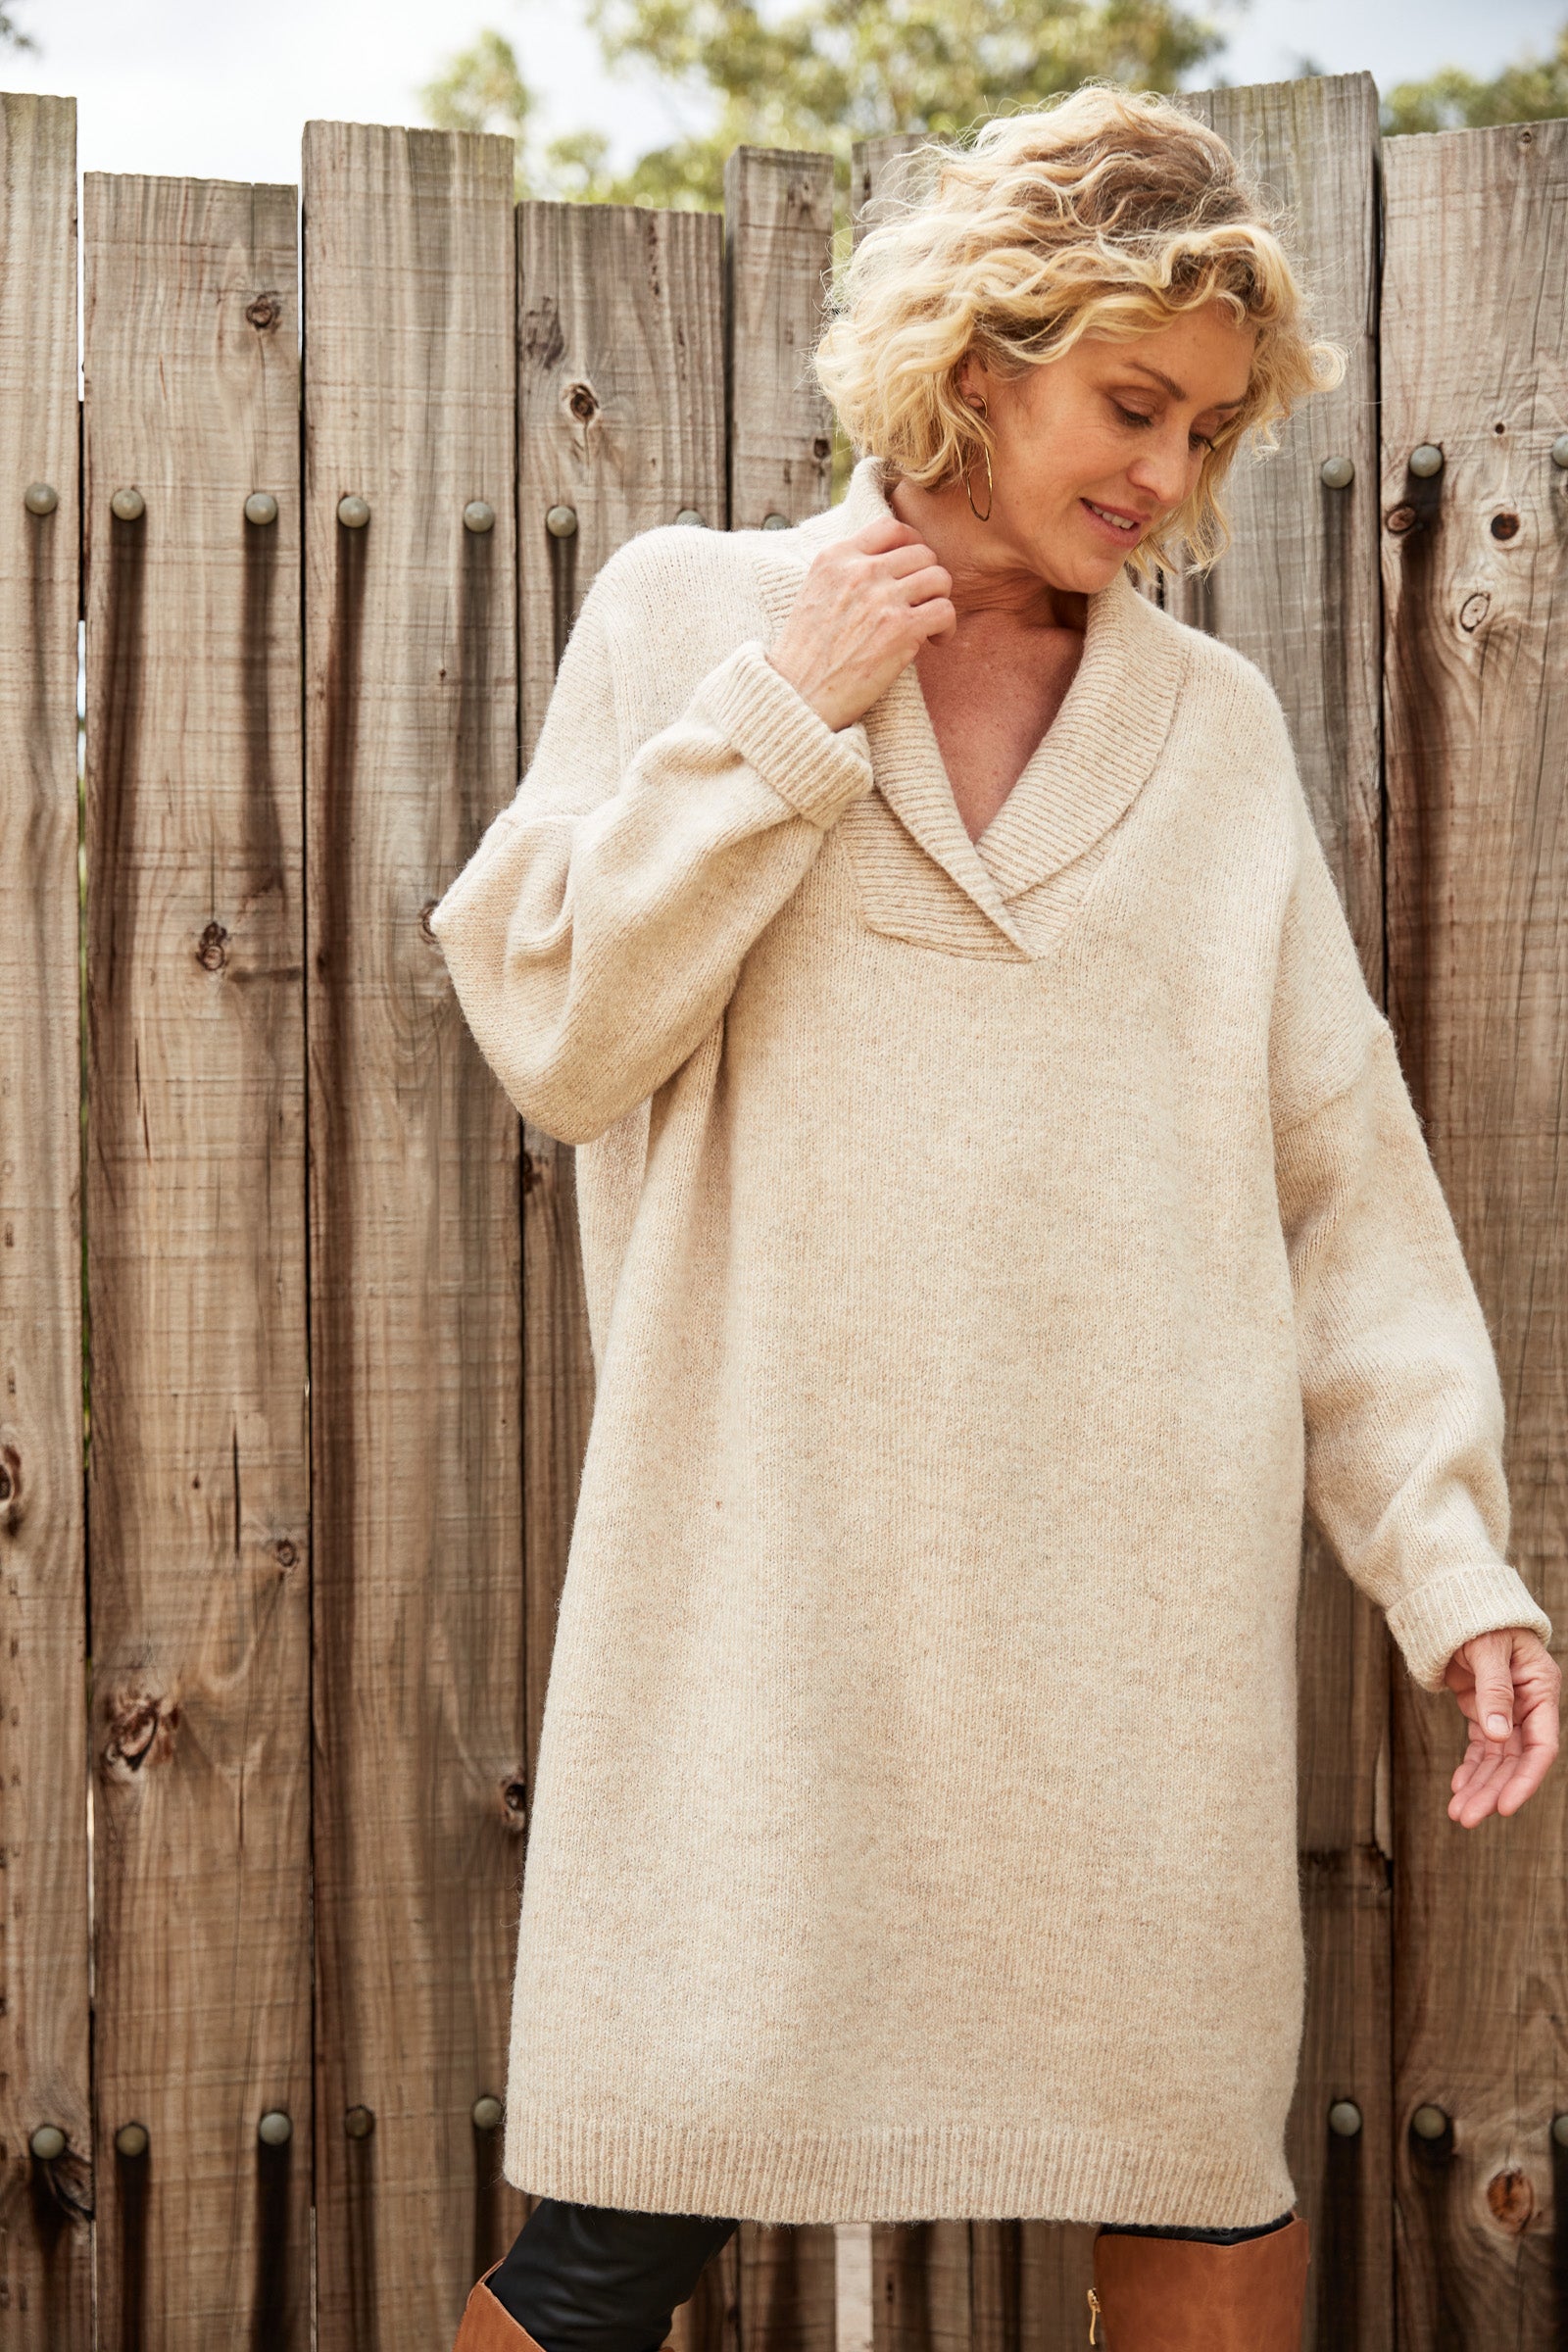 Paarl Top/Dress - Oat - eb&ive Clothing - Knit Jumper One Size